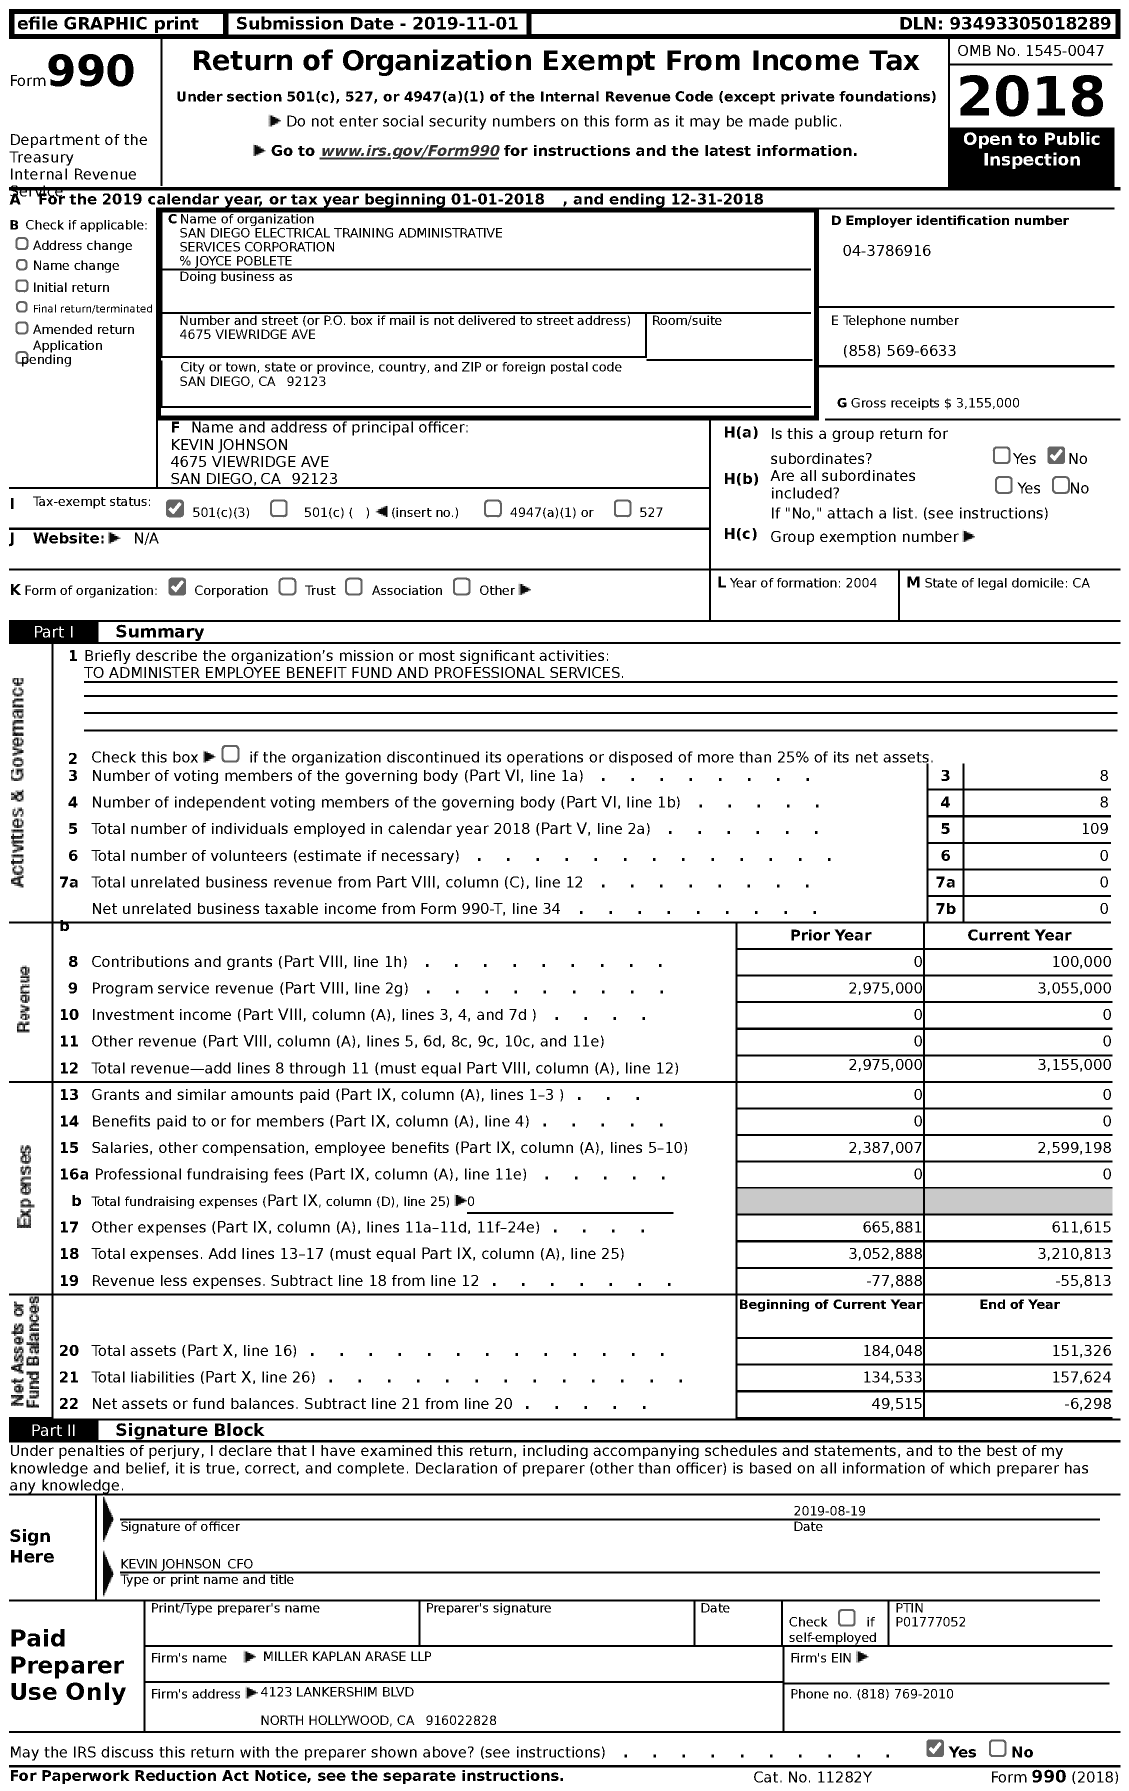 Image of first page of 2018 Form 990 for San Diego Electrical Training Administrative Services Corporation